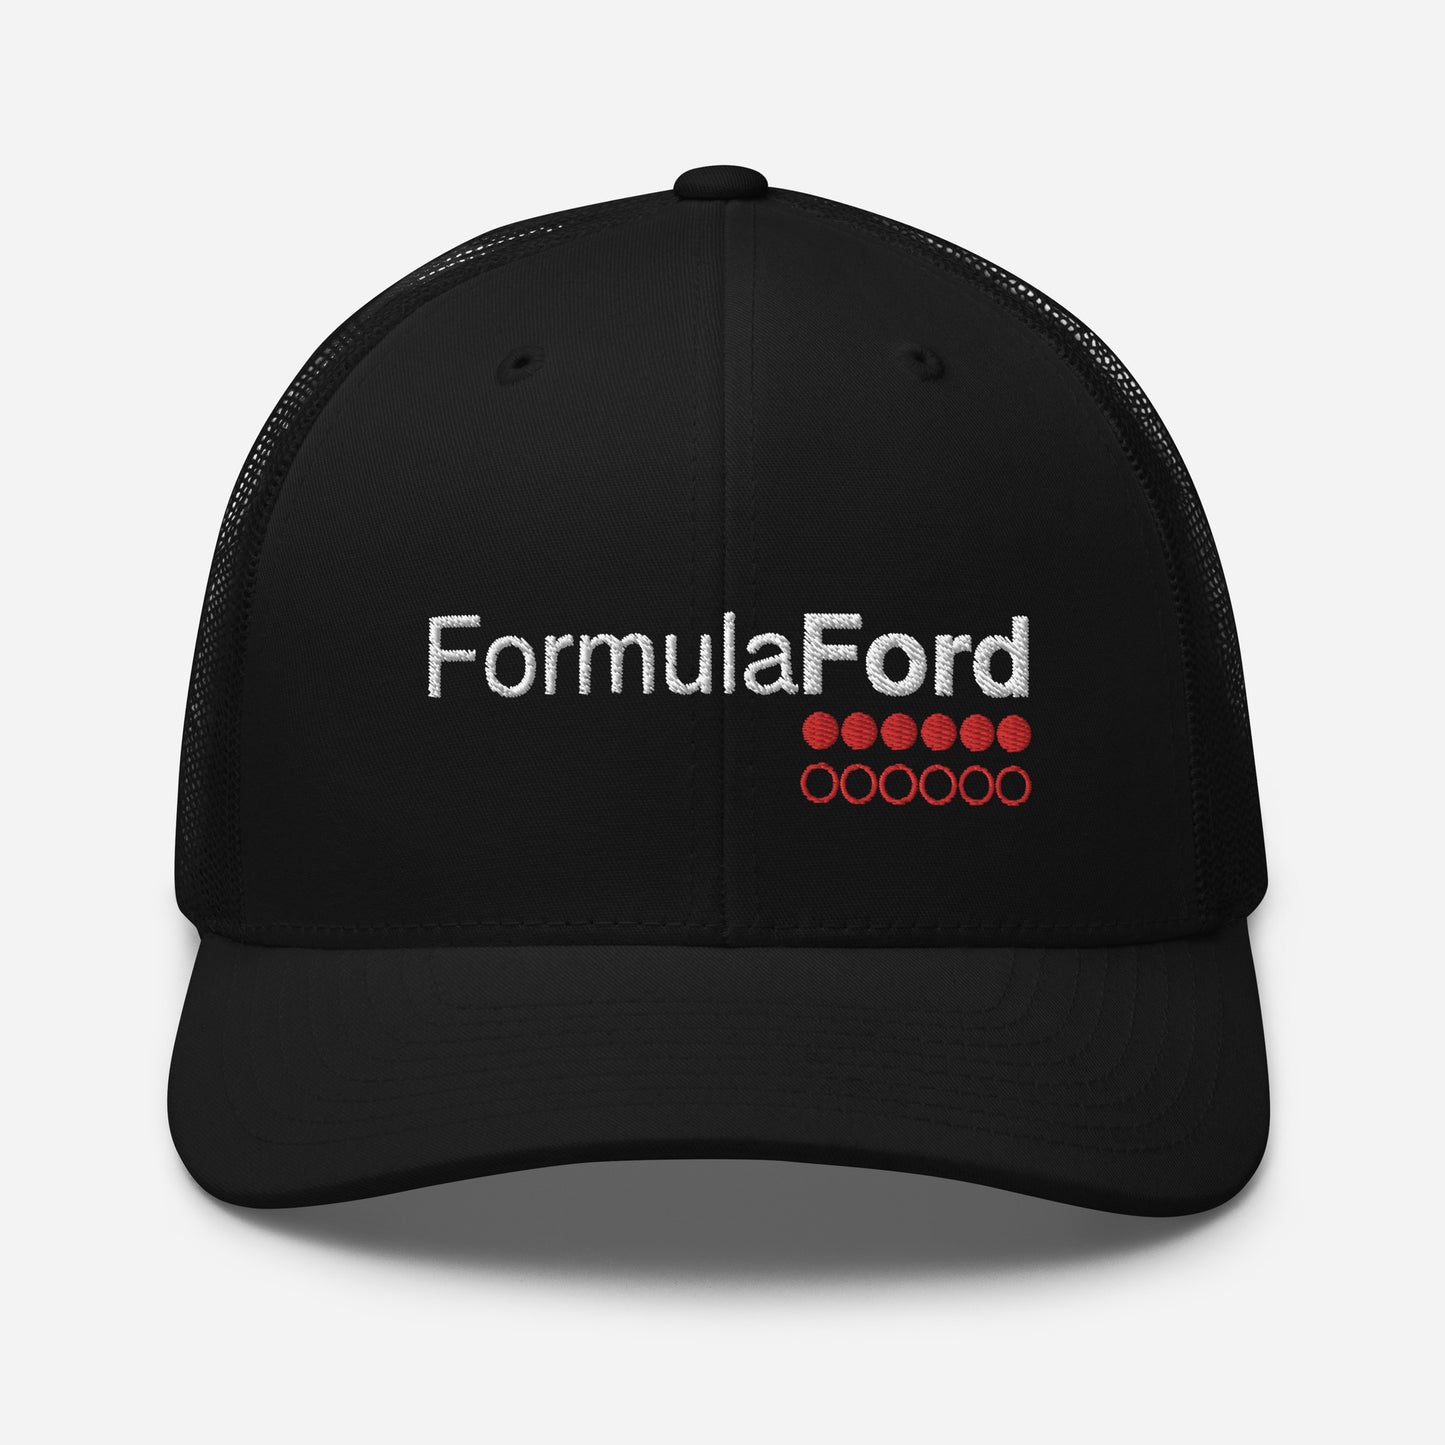 FORMULA FORD Official Embroidered Trucker Cap - full carbon